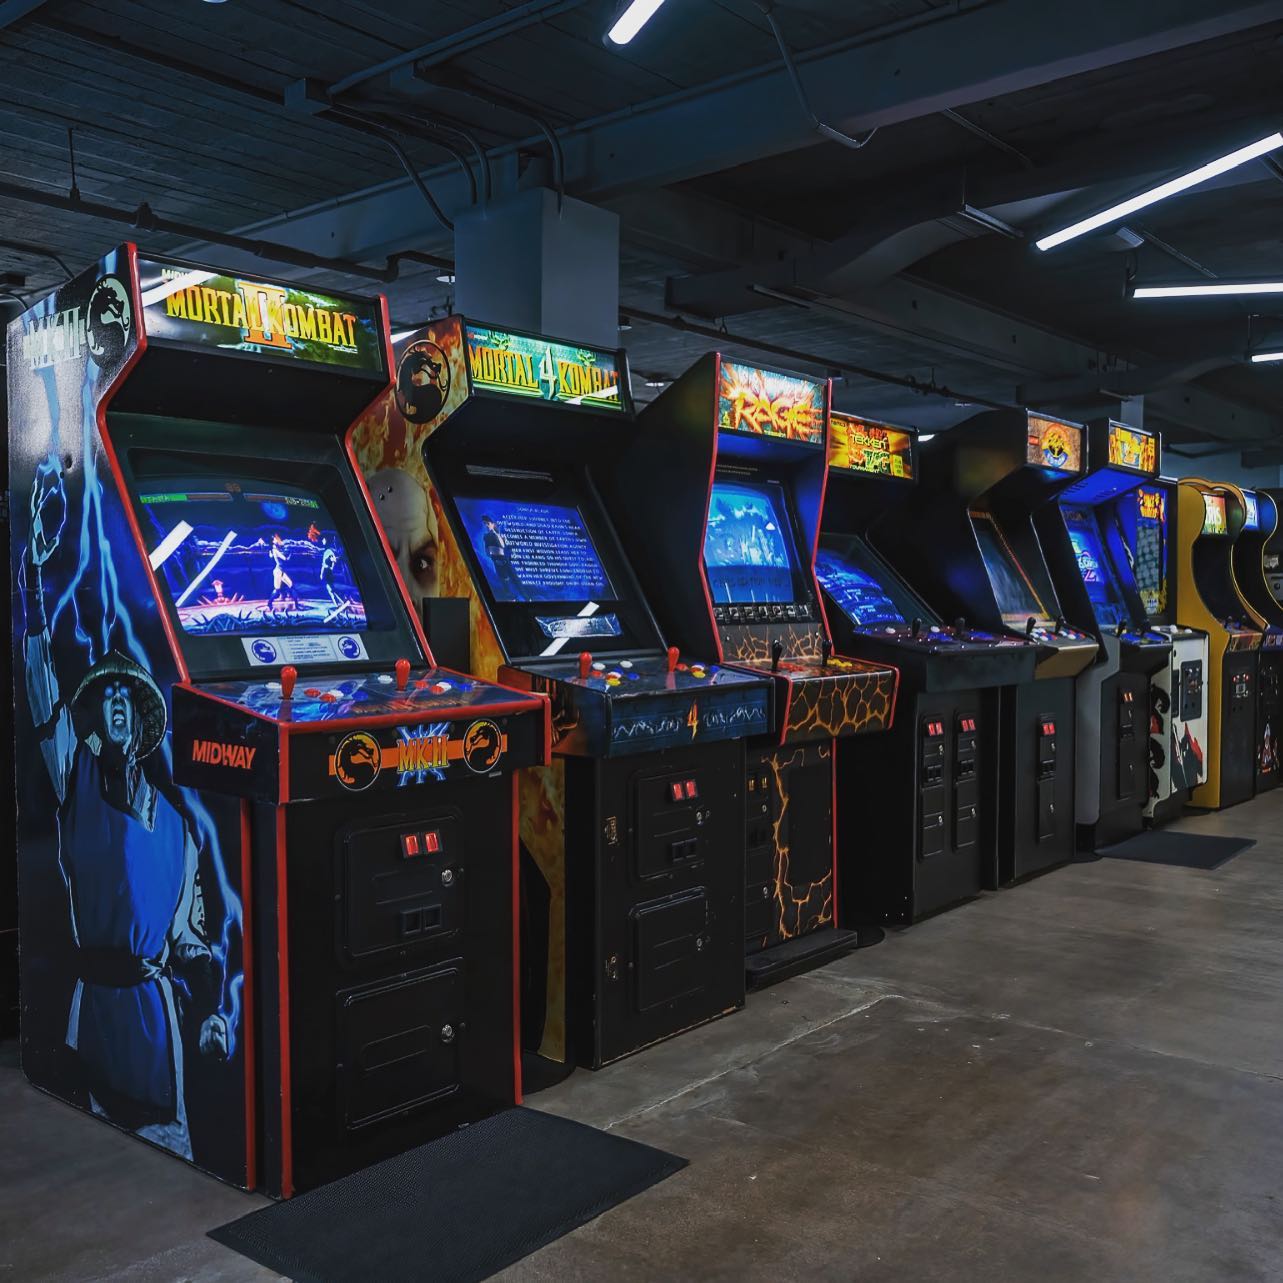 Happy Friday everyone! Grab some friends and come to The Reboot Social this weekend. Our arcade awaits you!